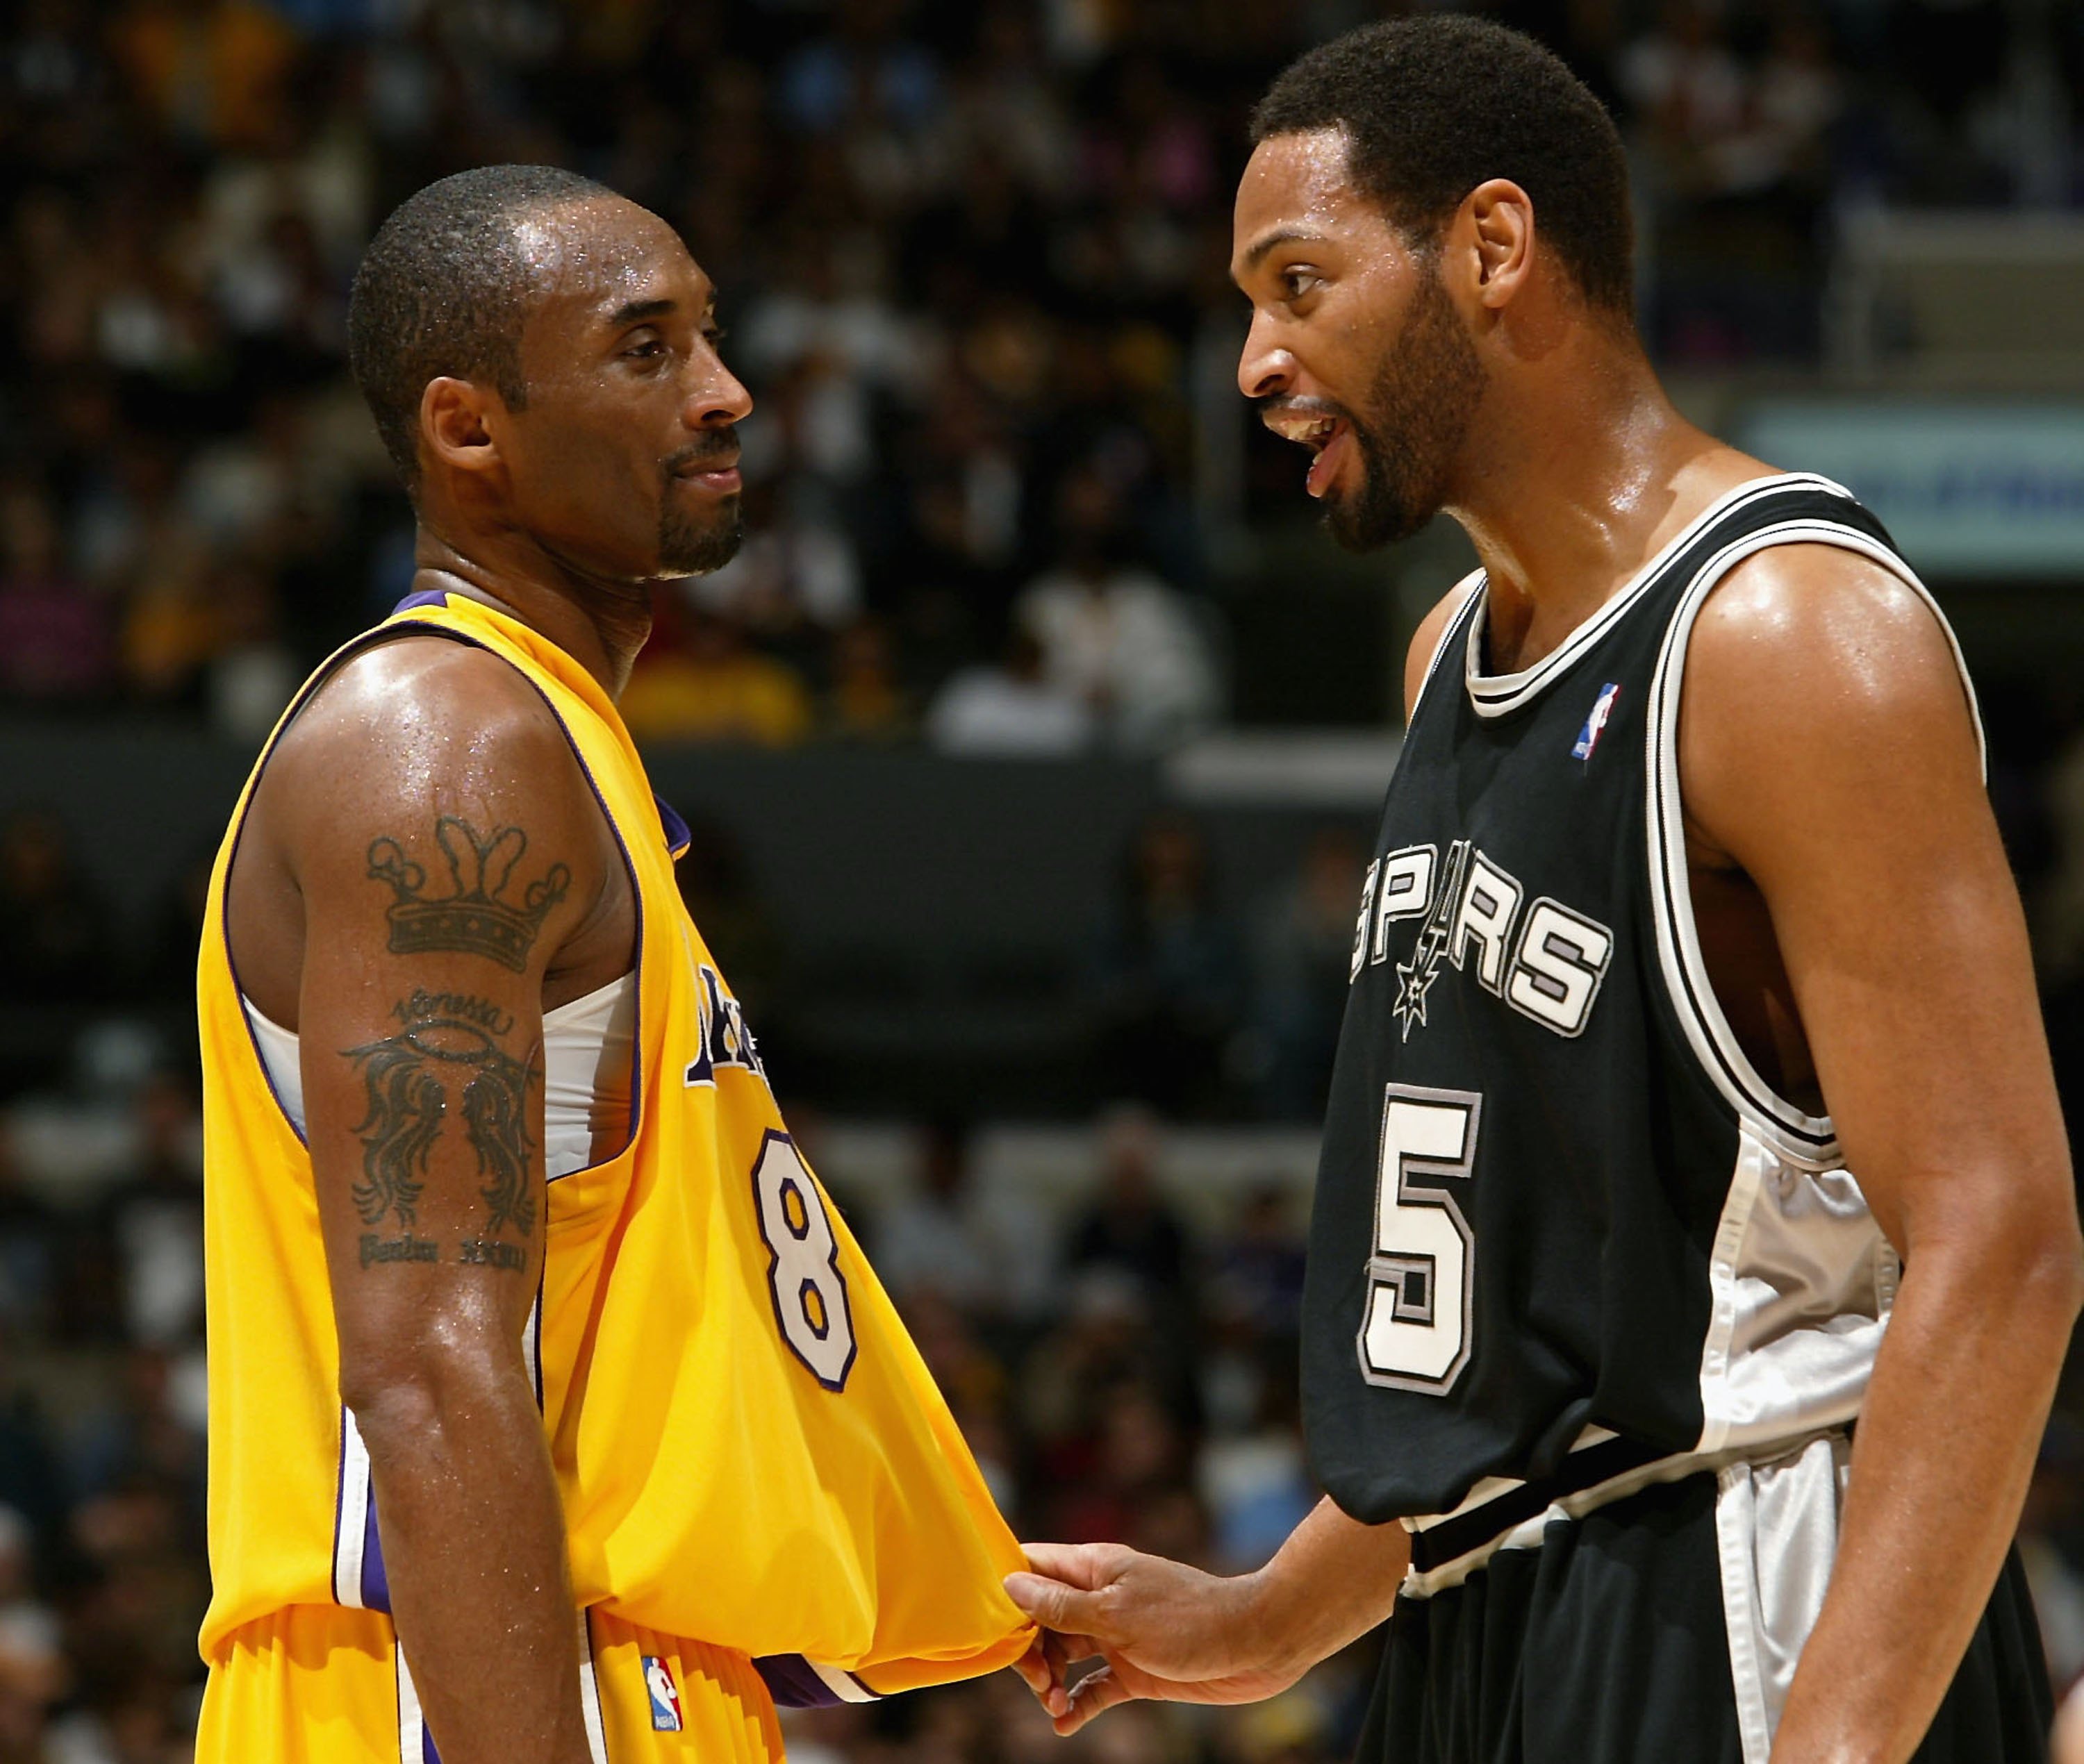 Robert Horry of the San Antonio Spurs and Kobe Bryant of the Los Angeles Lakers joke during a timeout.